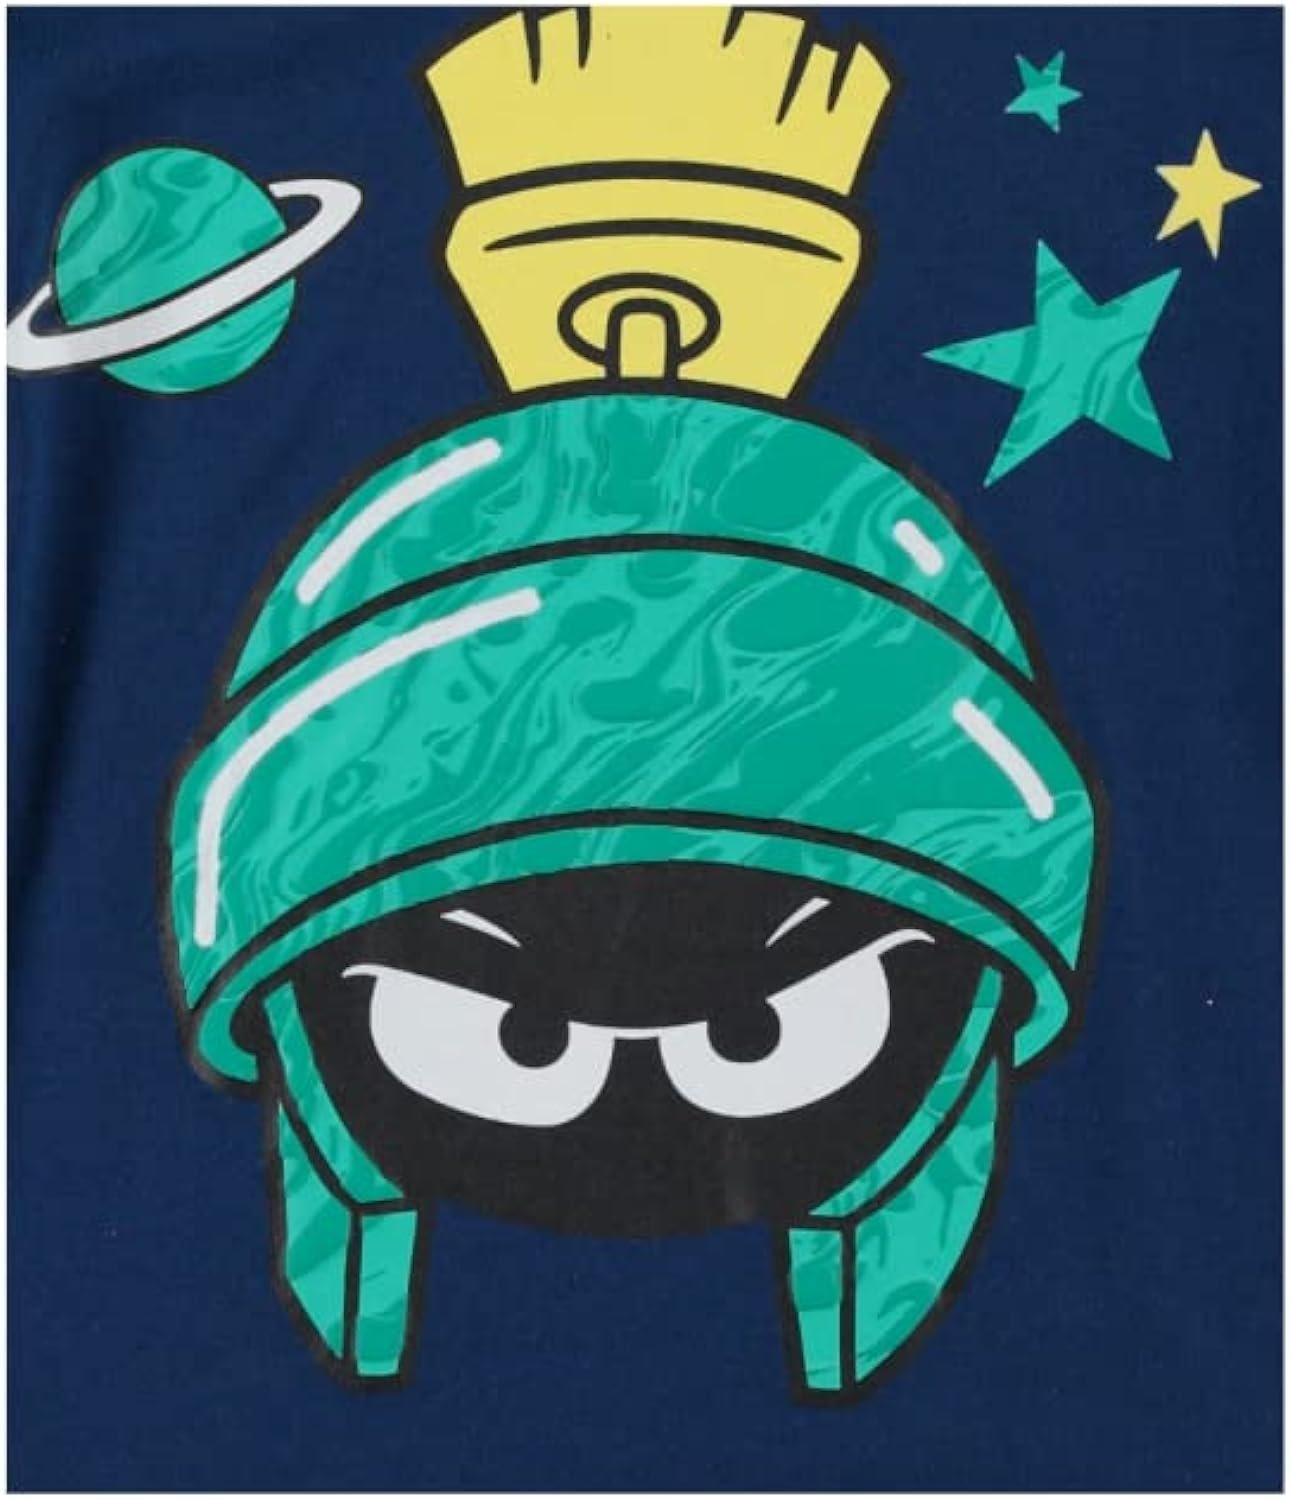 Looney Tunes Marvin The Martian Boys Long Sleeve T-Shirt with Face Mask